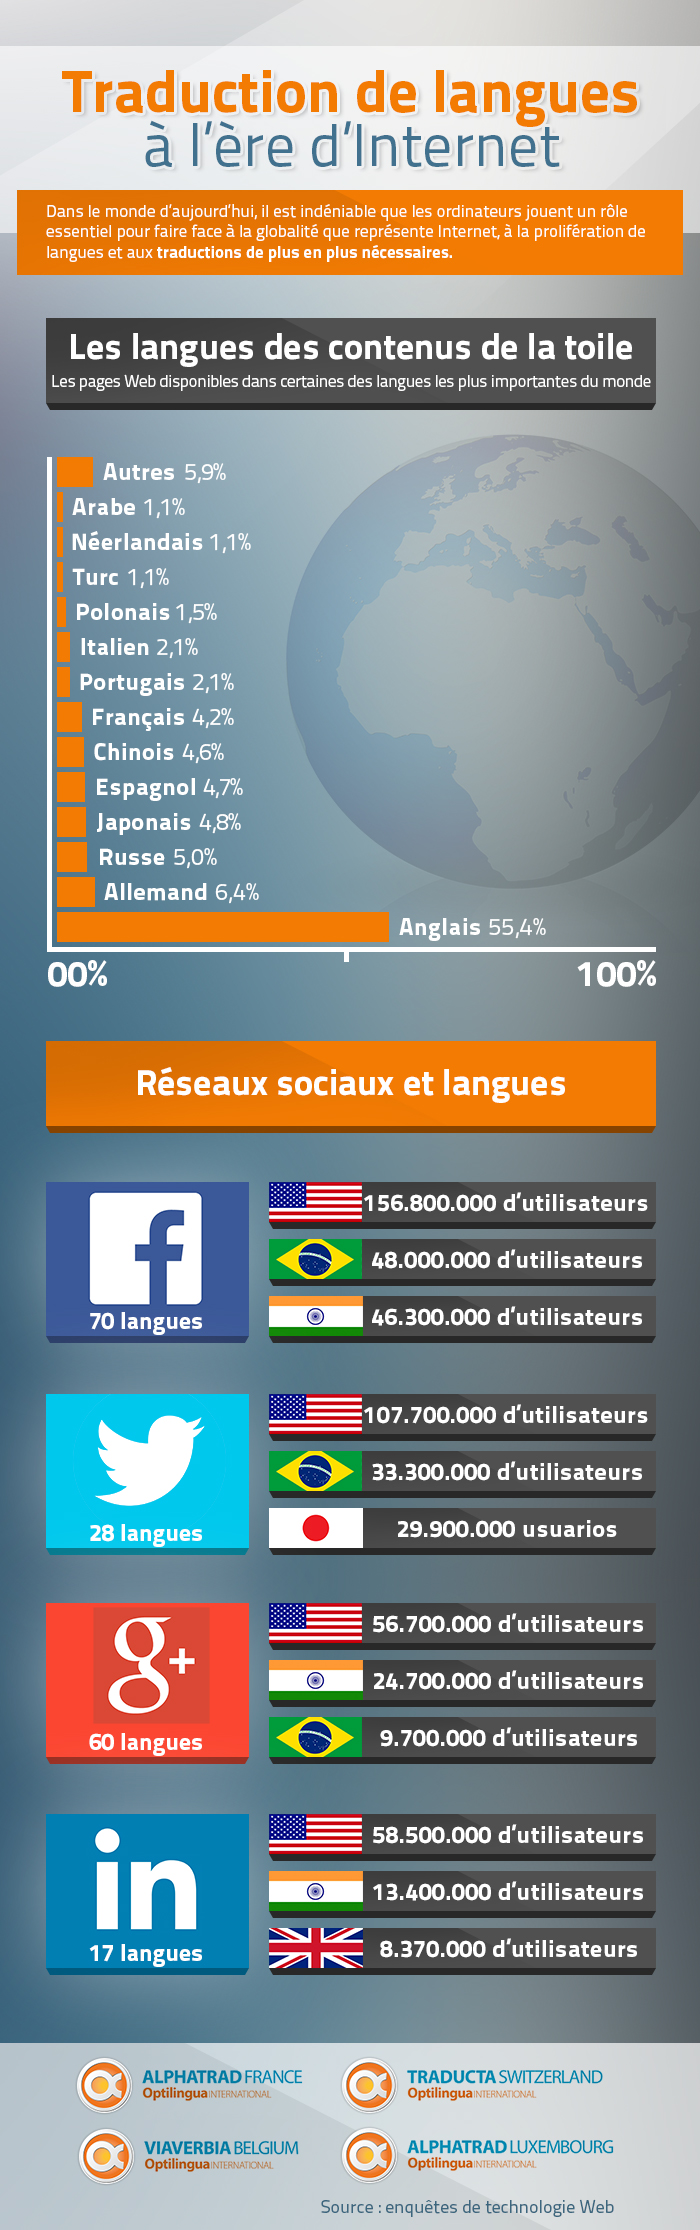 infographiste traduction